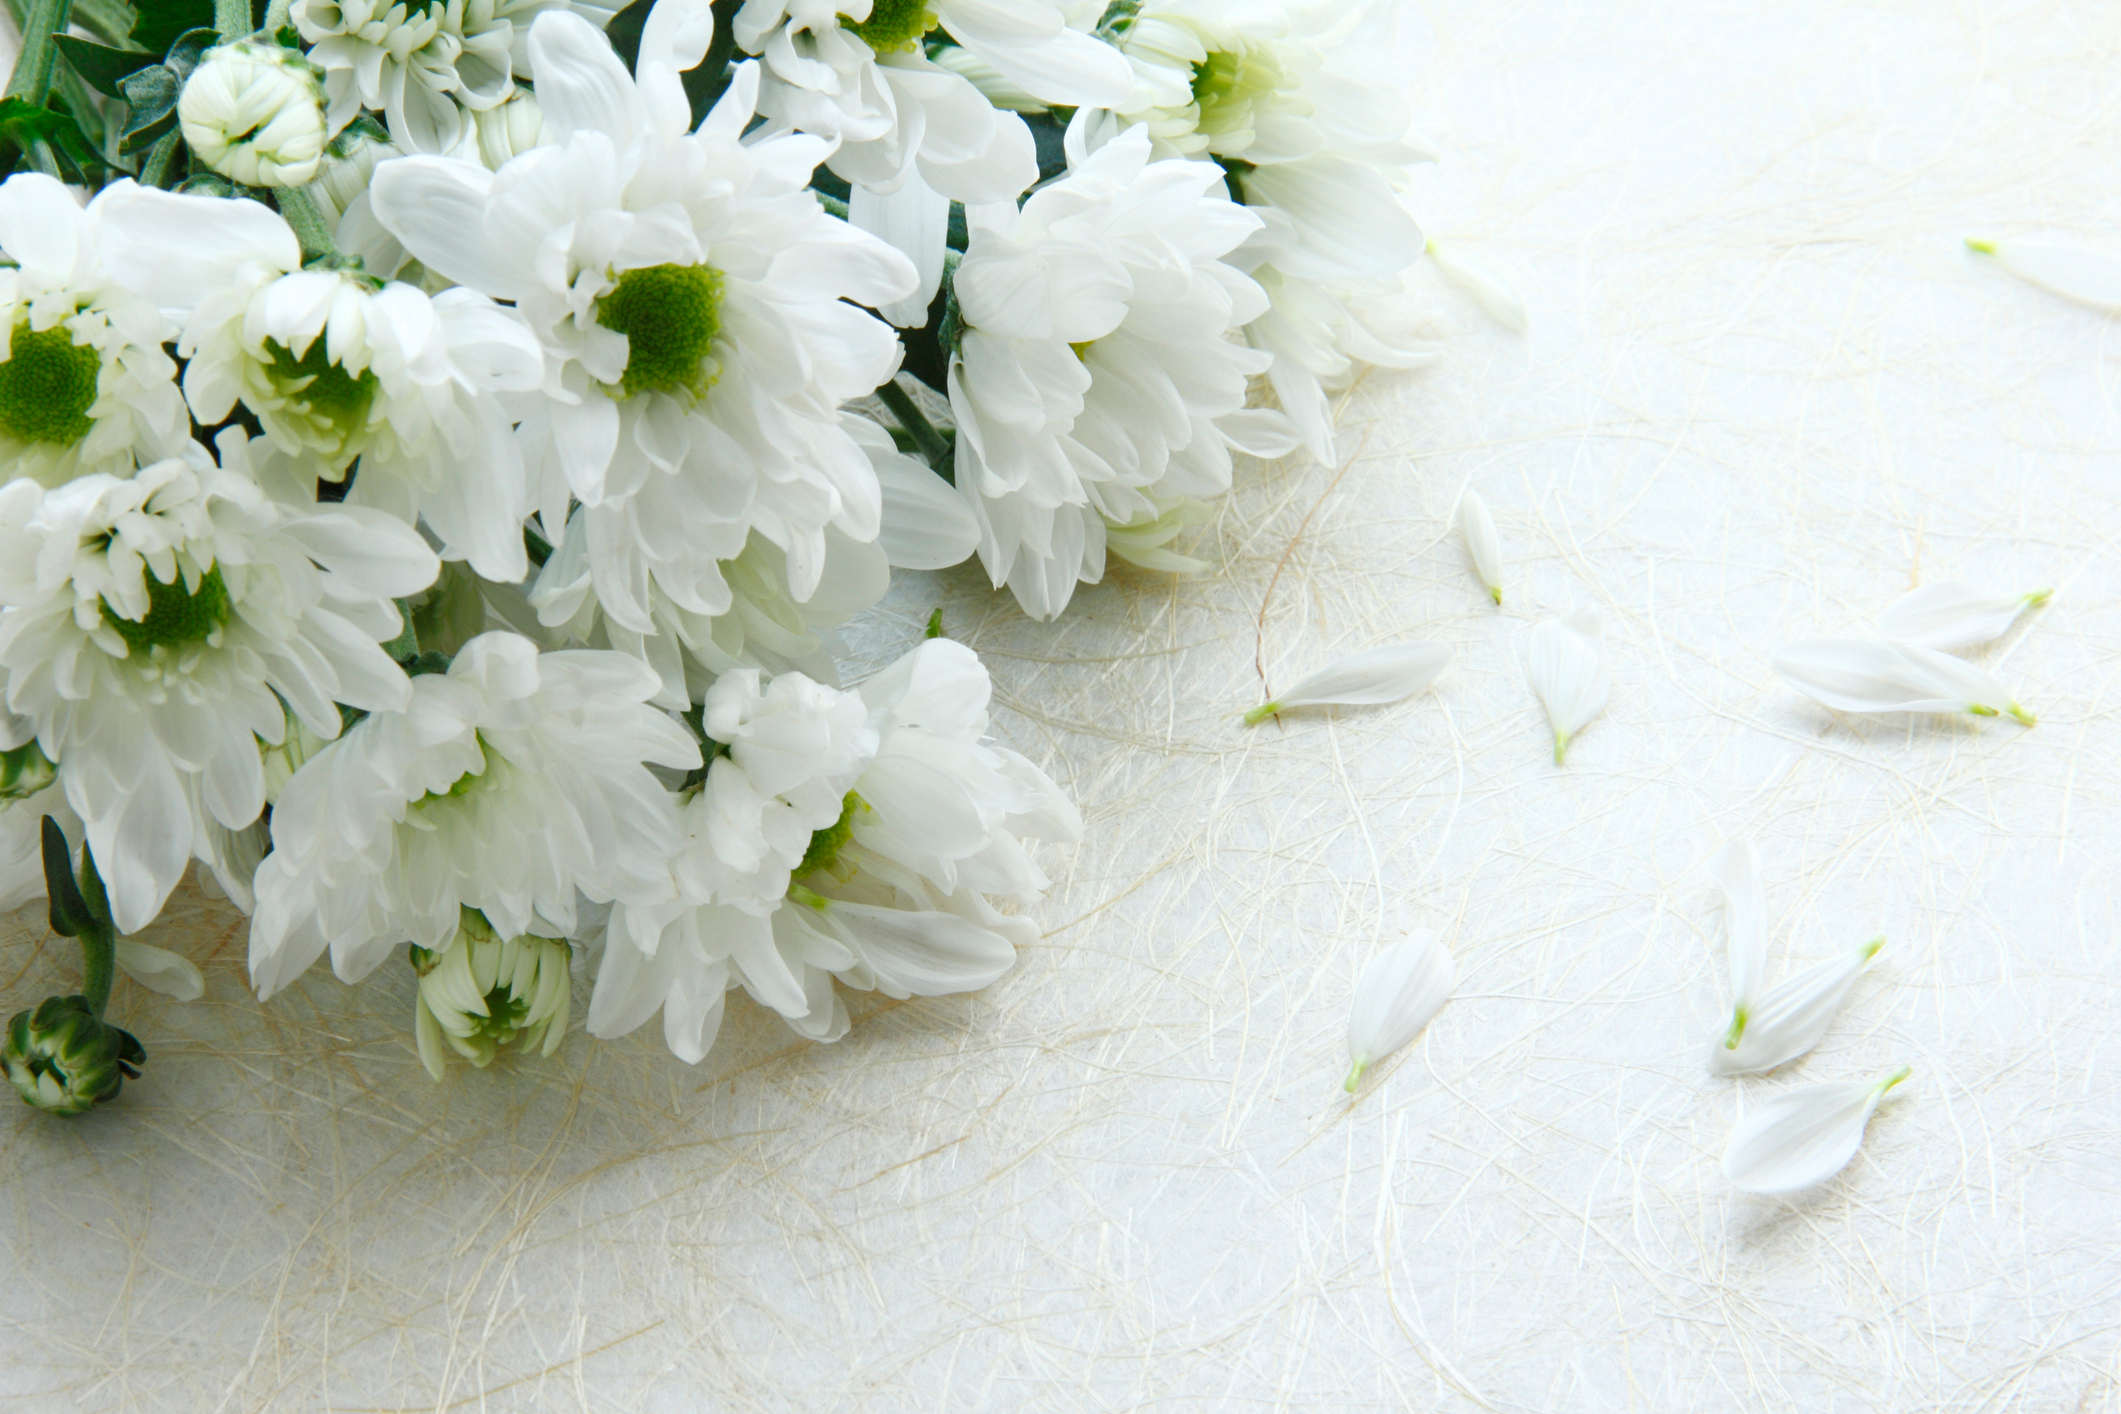 2021 Guide To Selecting The Right Funeral Flowers